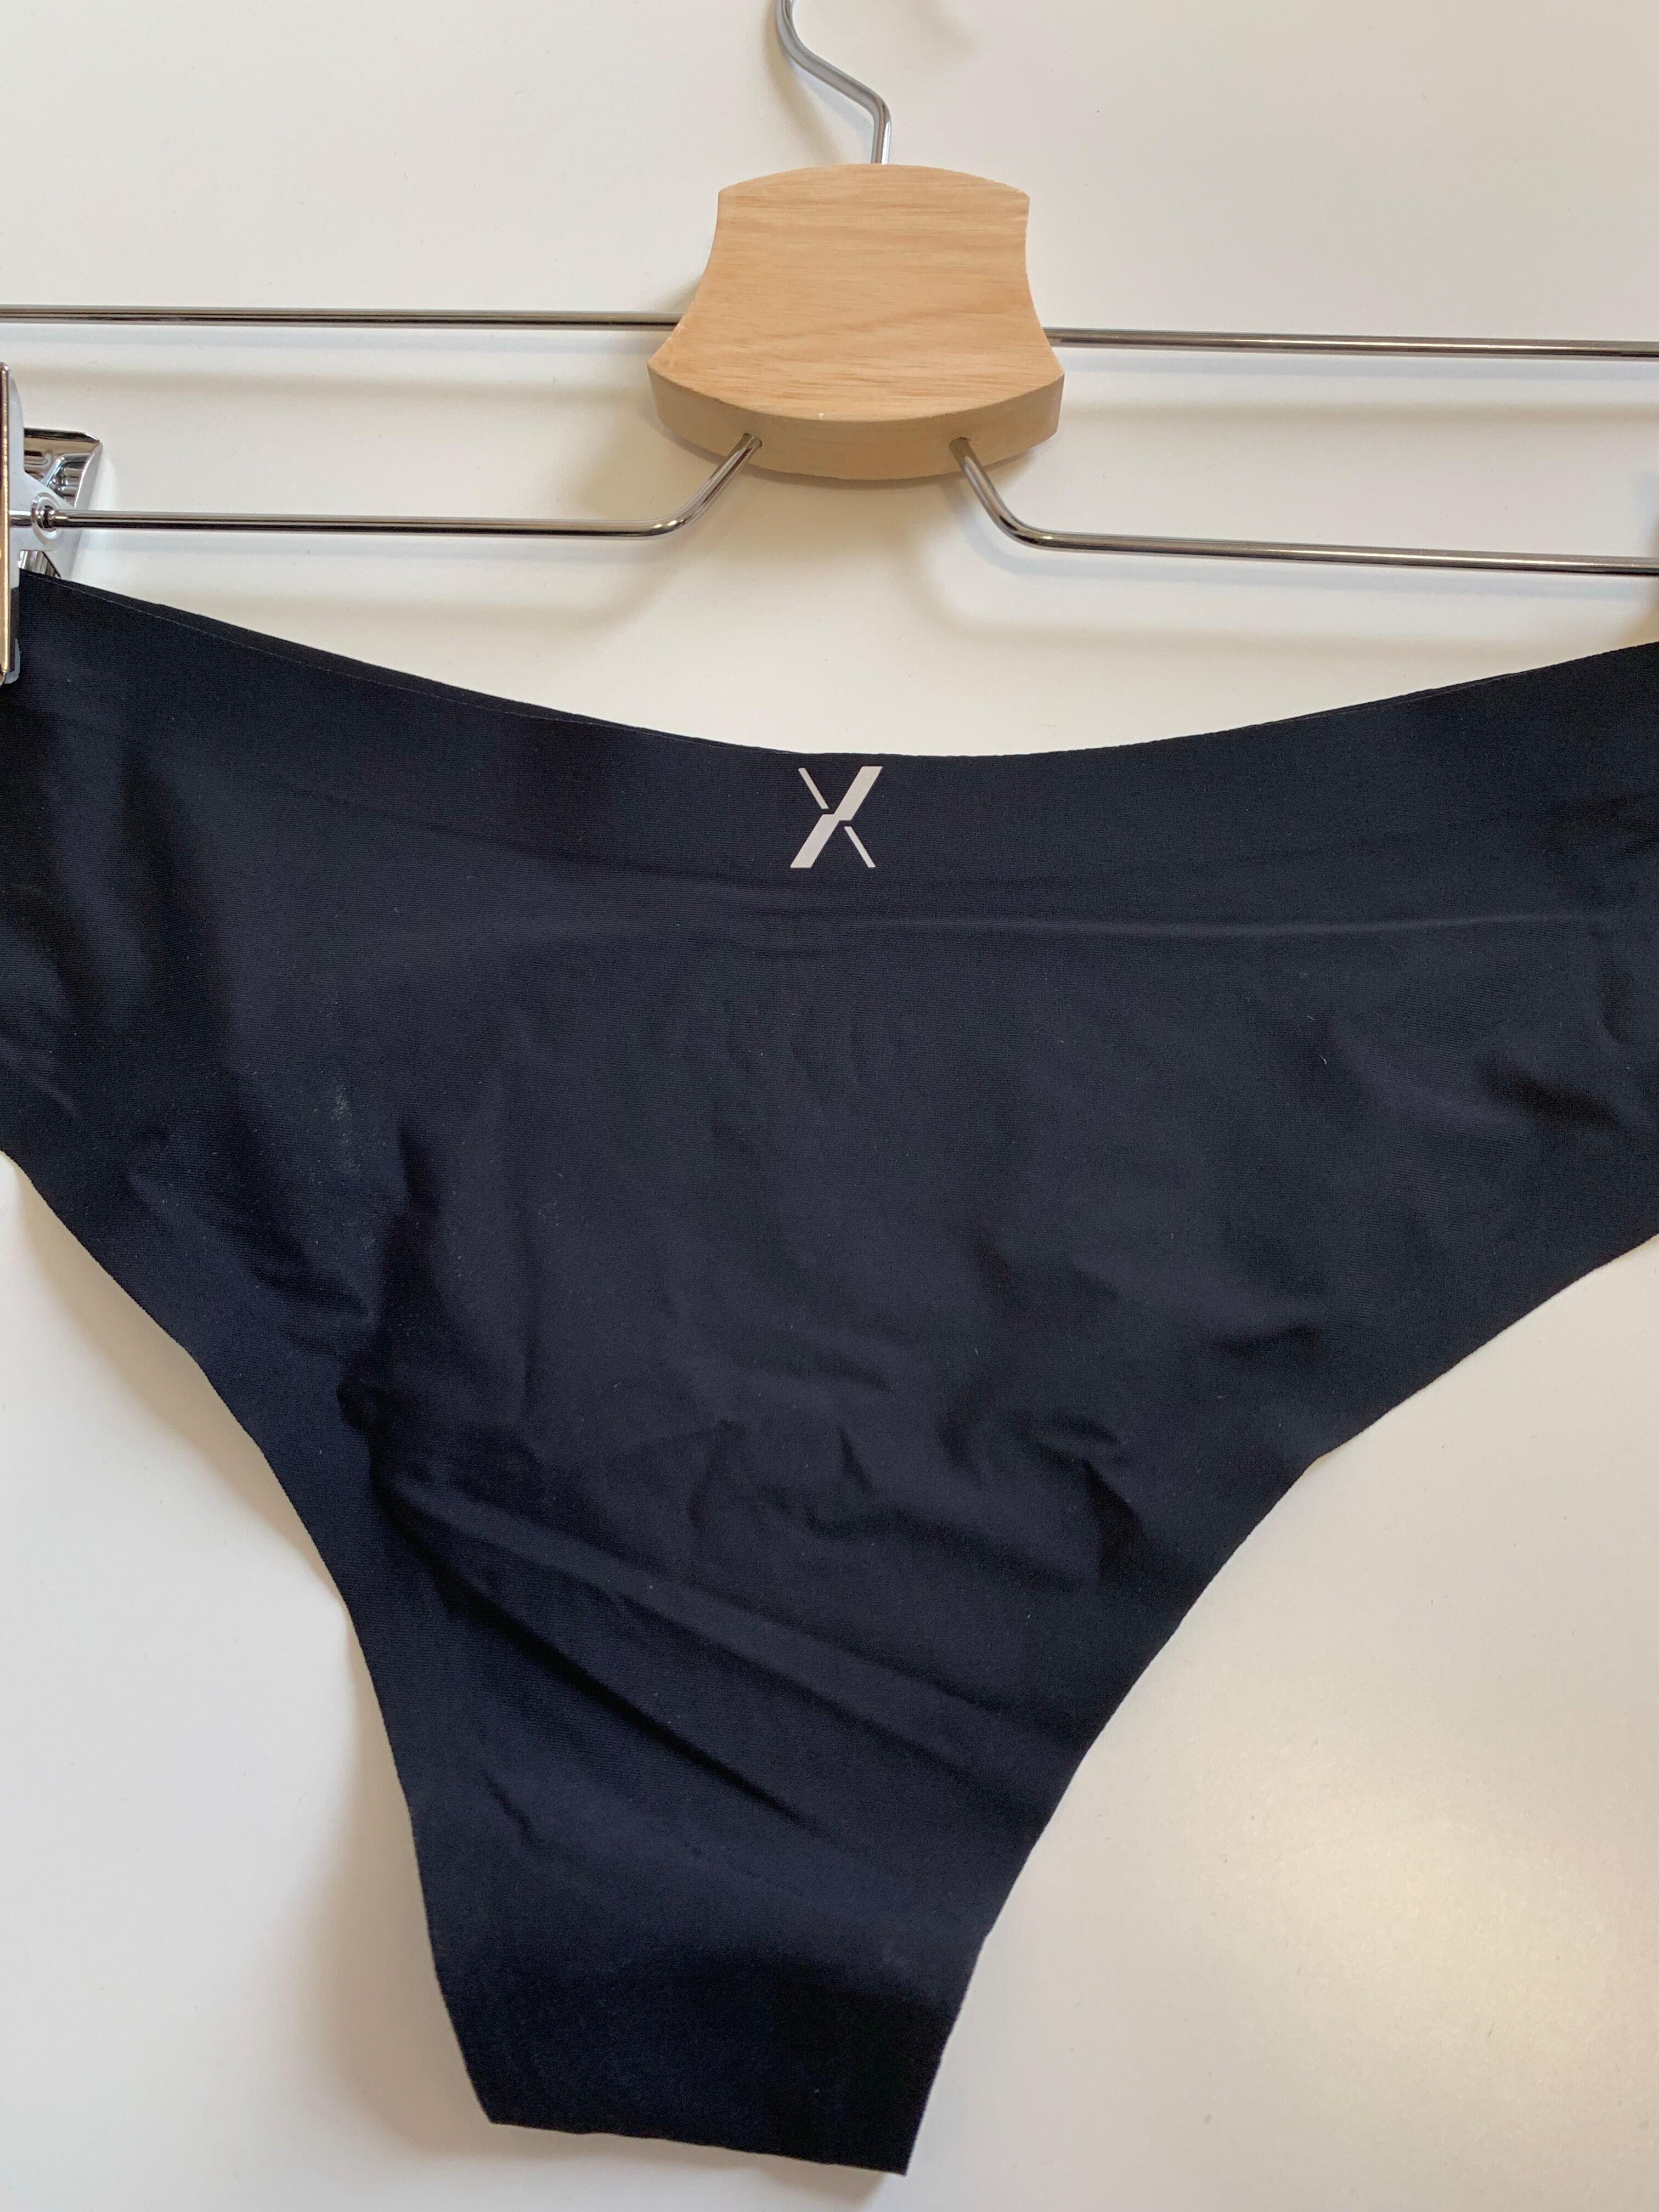 THE BEST FITTING PANTY IN THE WORLD! Trademark of SaraMax Apparel Group,  Inc. - Registration Number 4008315 - Serial Number 85049135 :: Justia  Trademarks